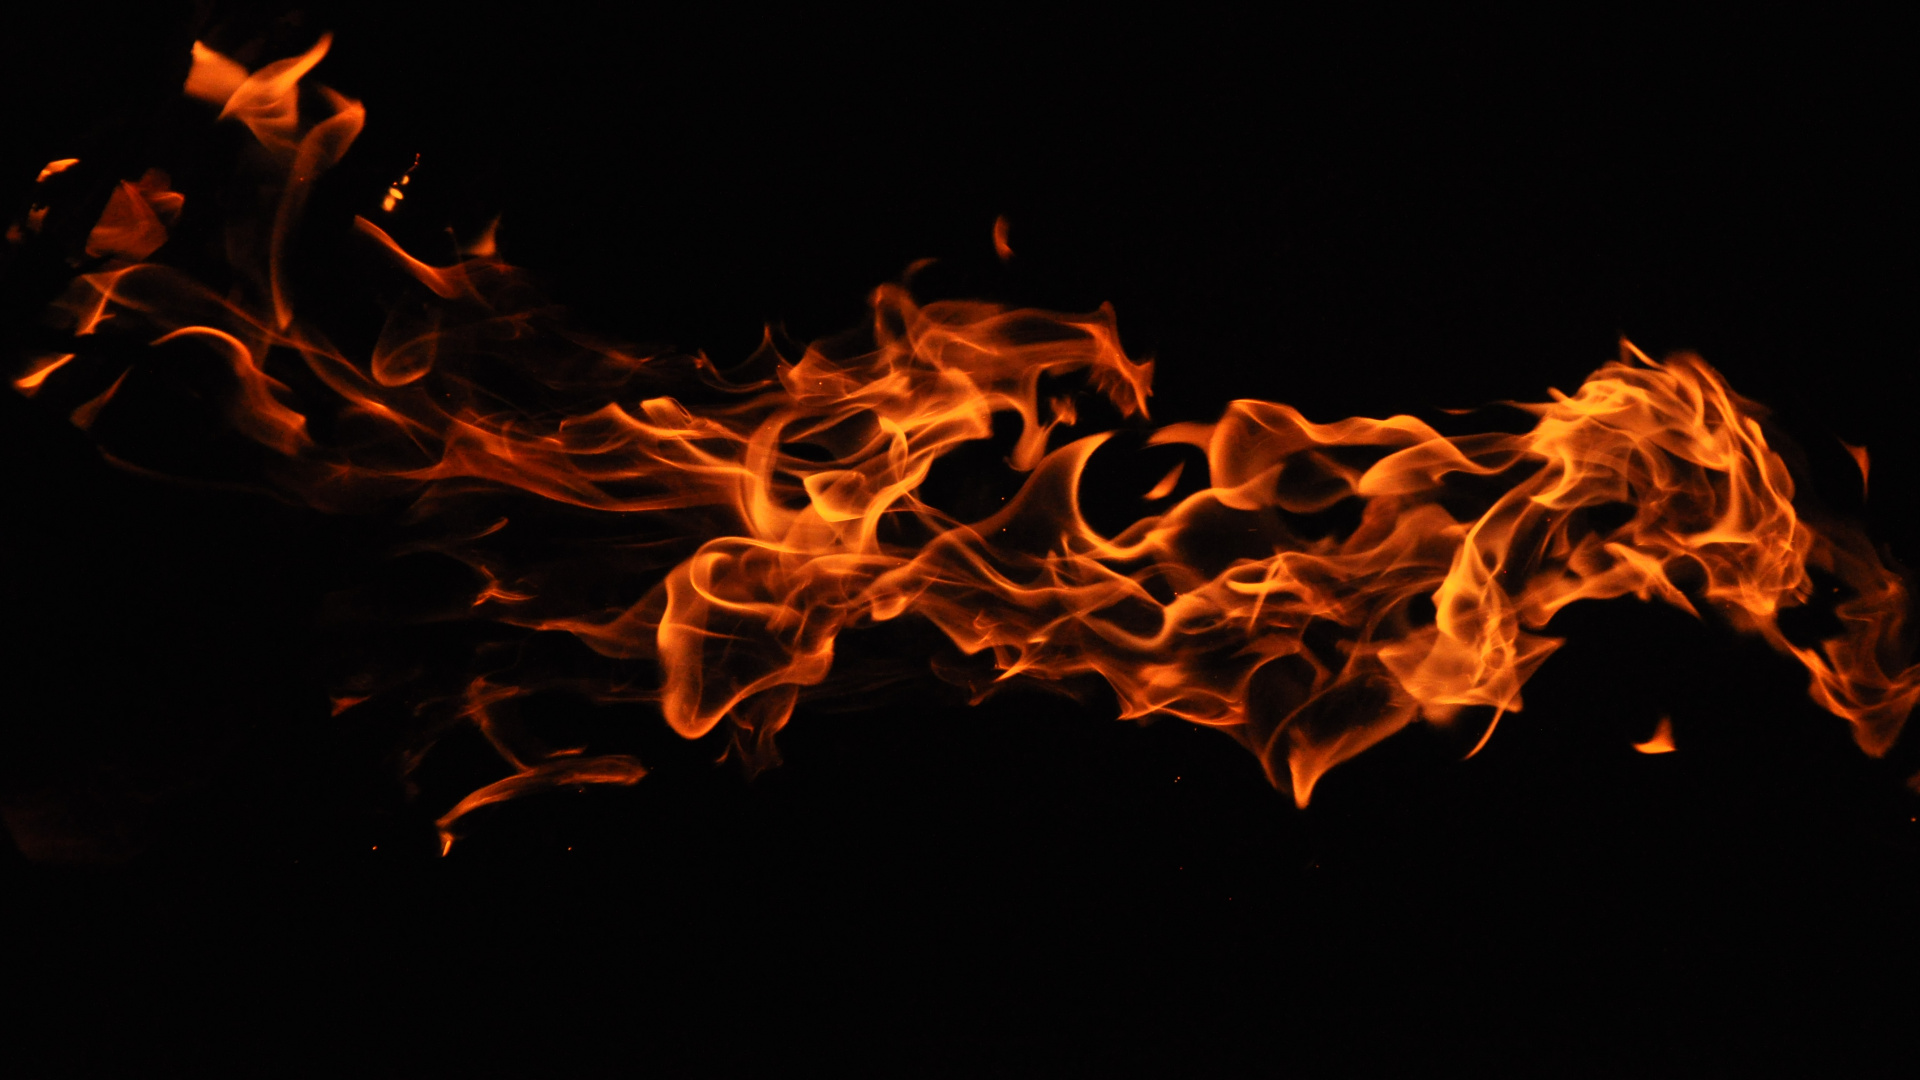 Fire in Black Background With Black Background. Wallpaper in 1920x1080 Resolution